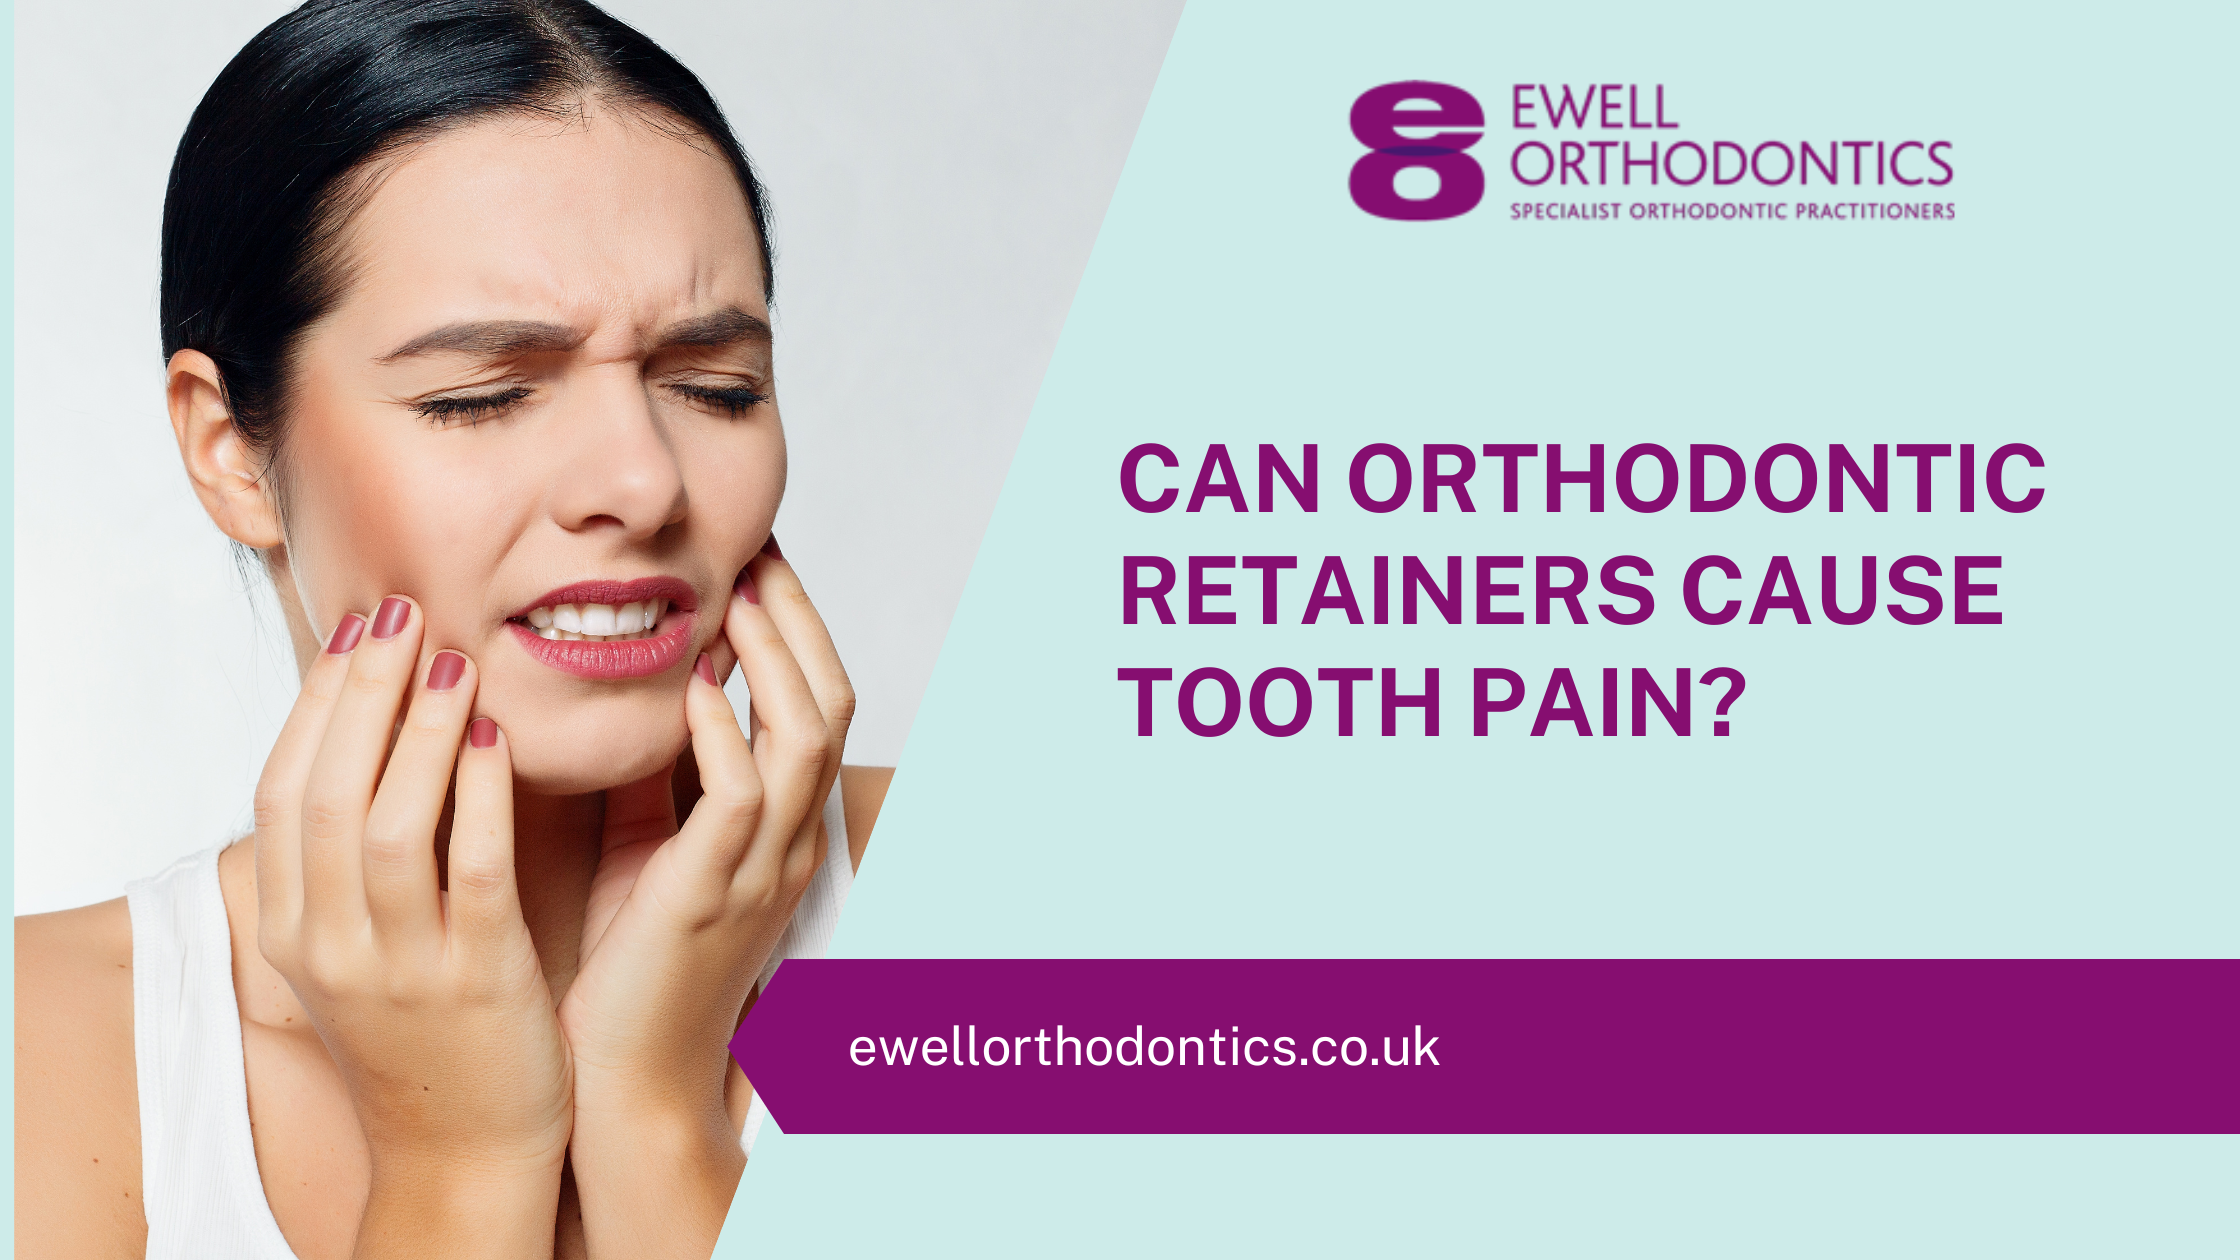 Can Orthodontic Retainers Cause Tooth Pain?